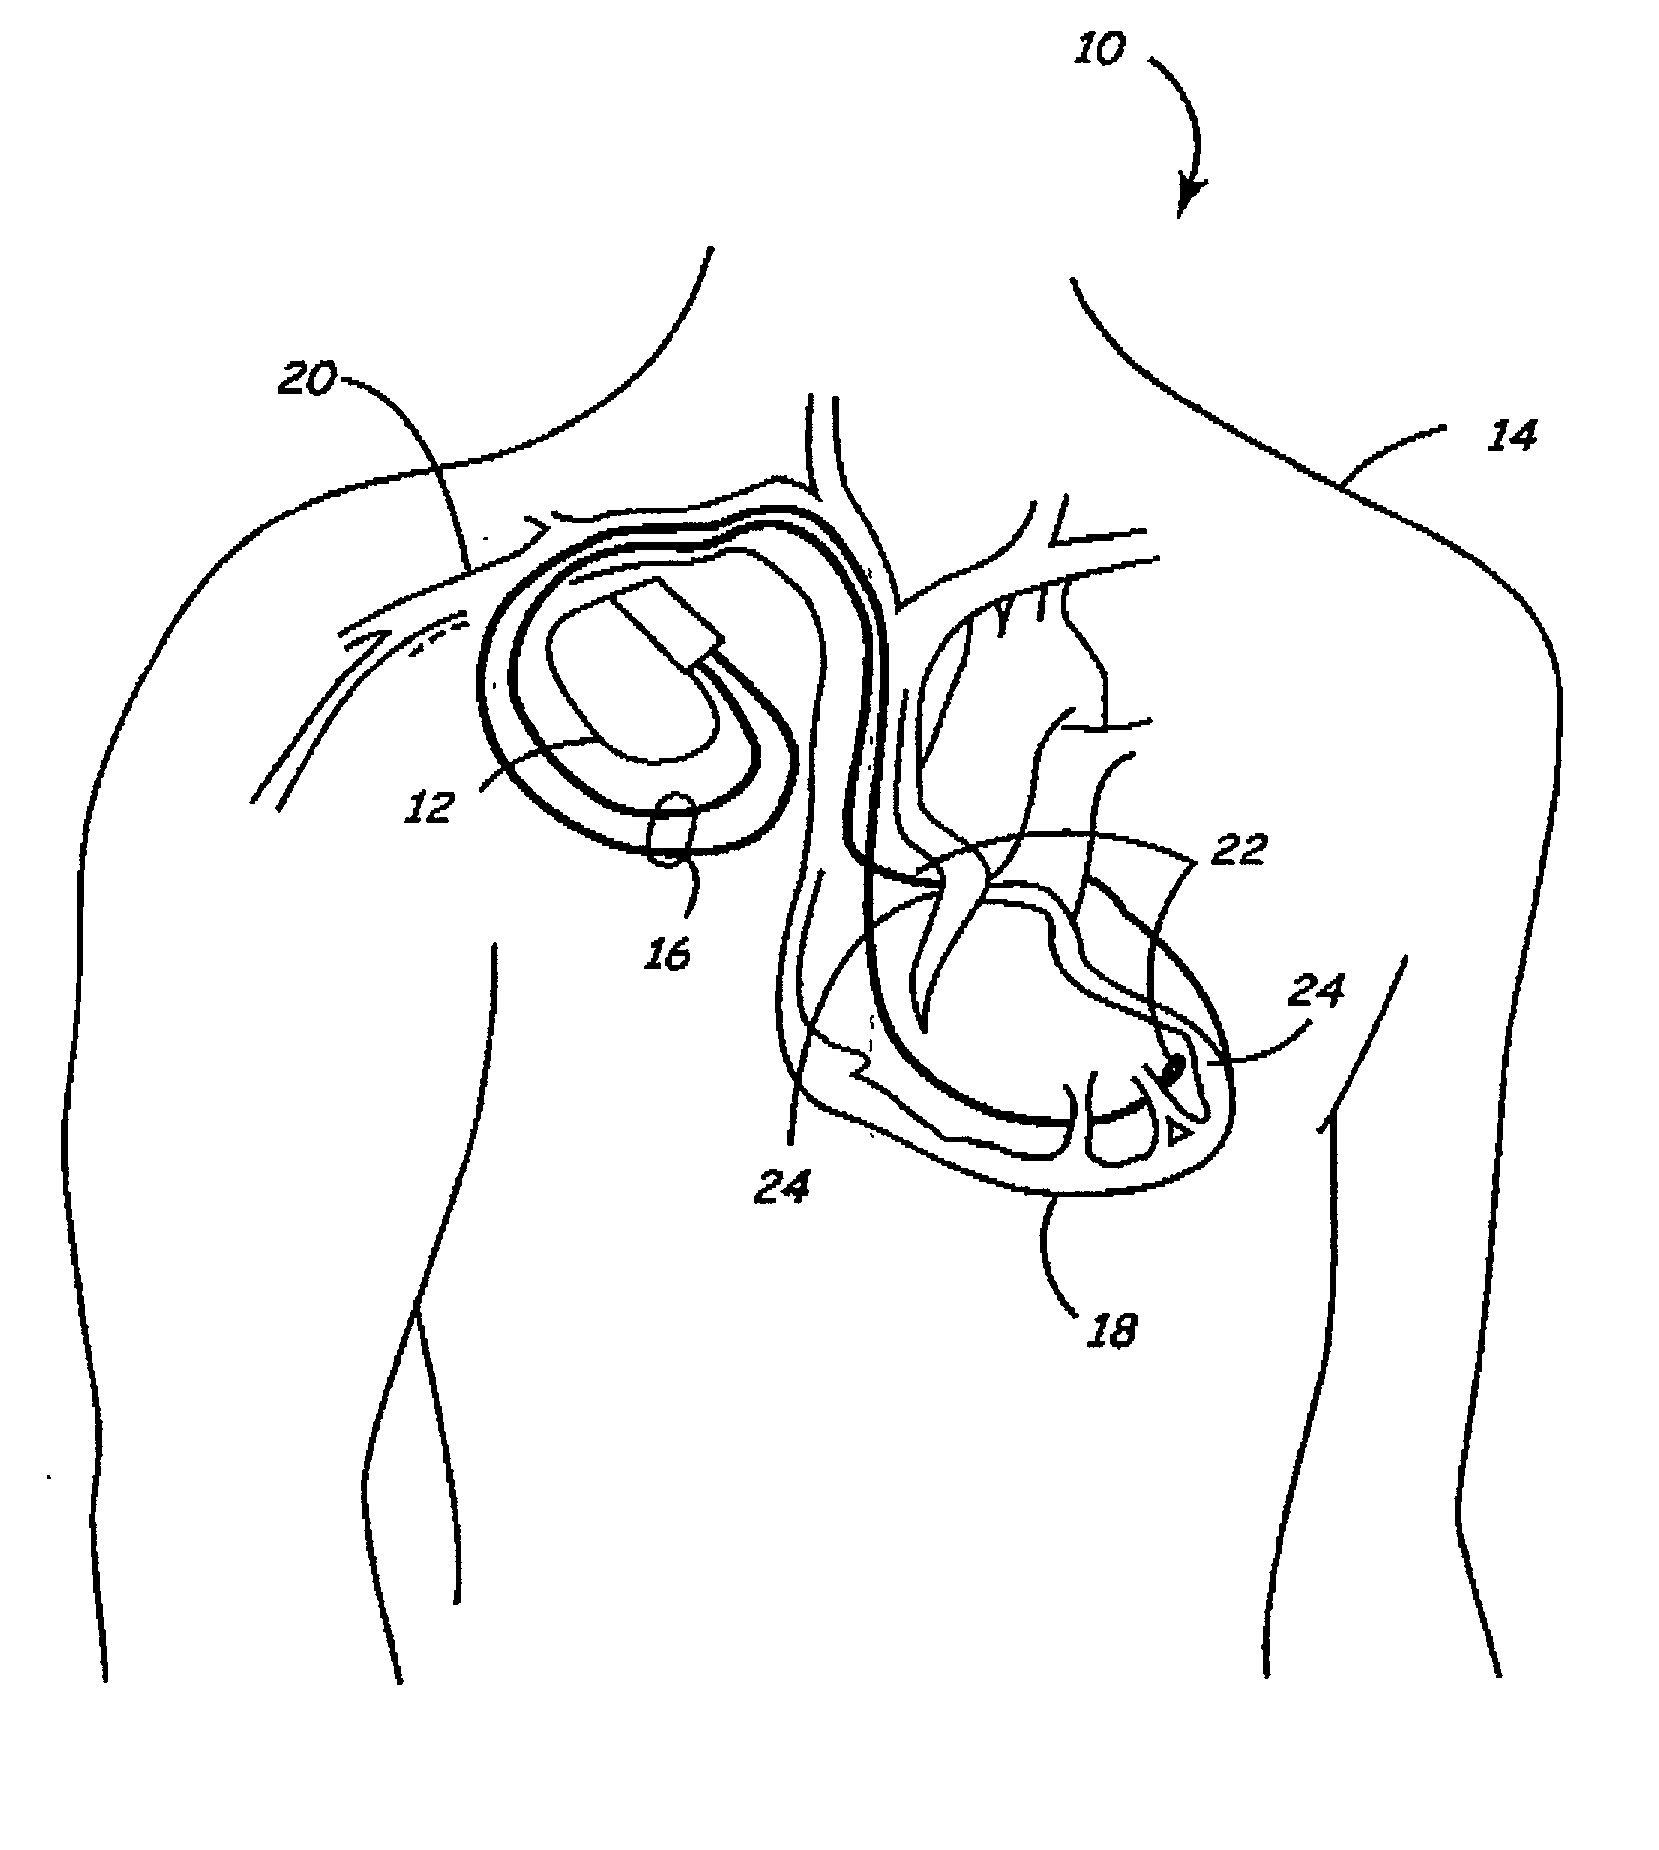 Medical implantable system for reducing magnetic resonance effects